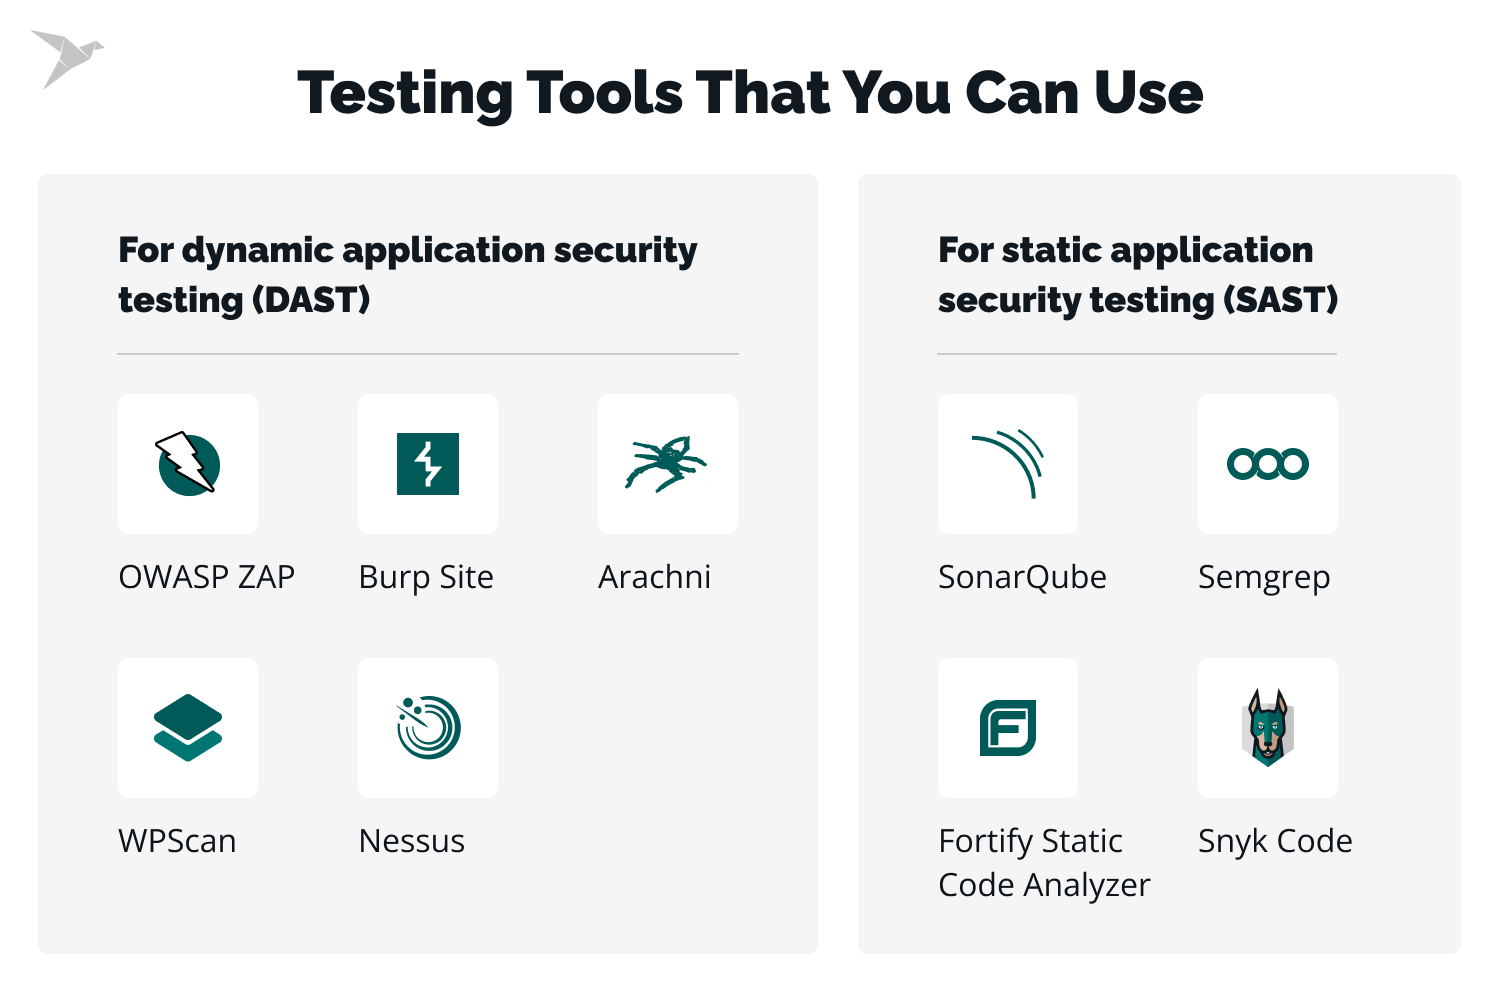 DAST and SAST applications for security testing 